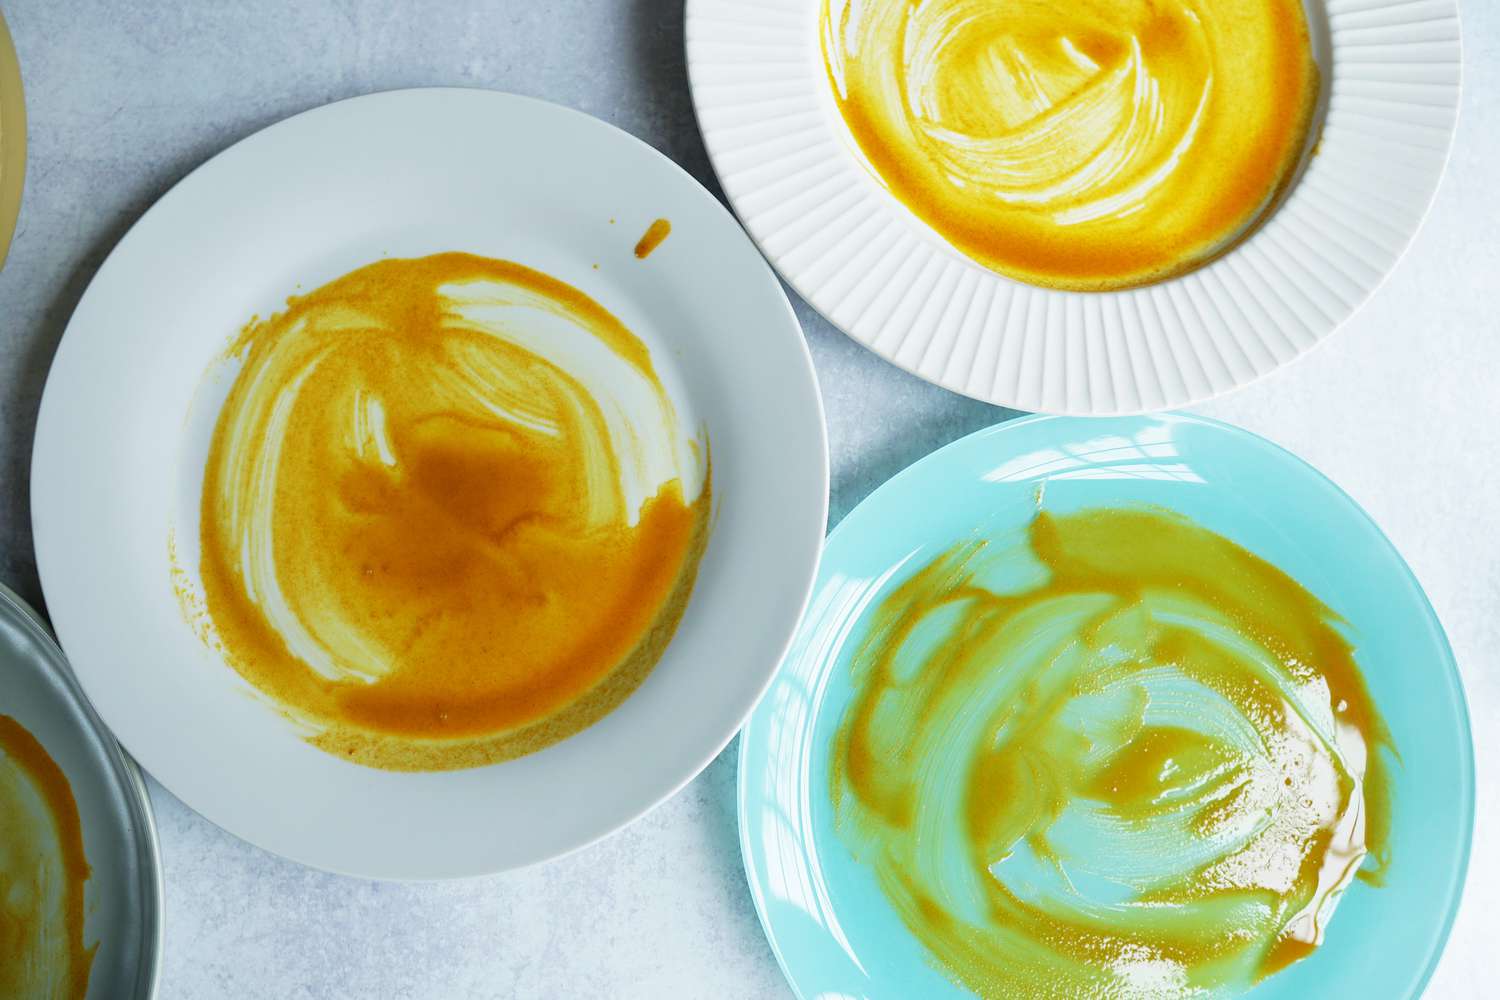 several dinner plates smeared with a turmeric-oil mixture